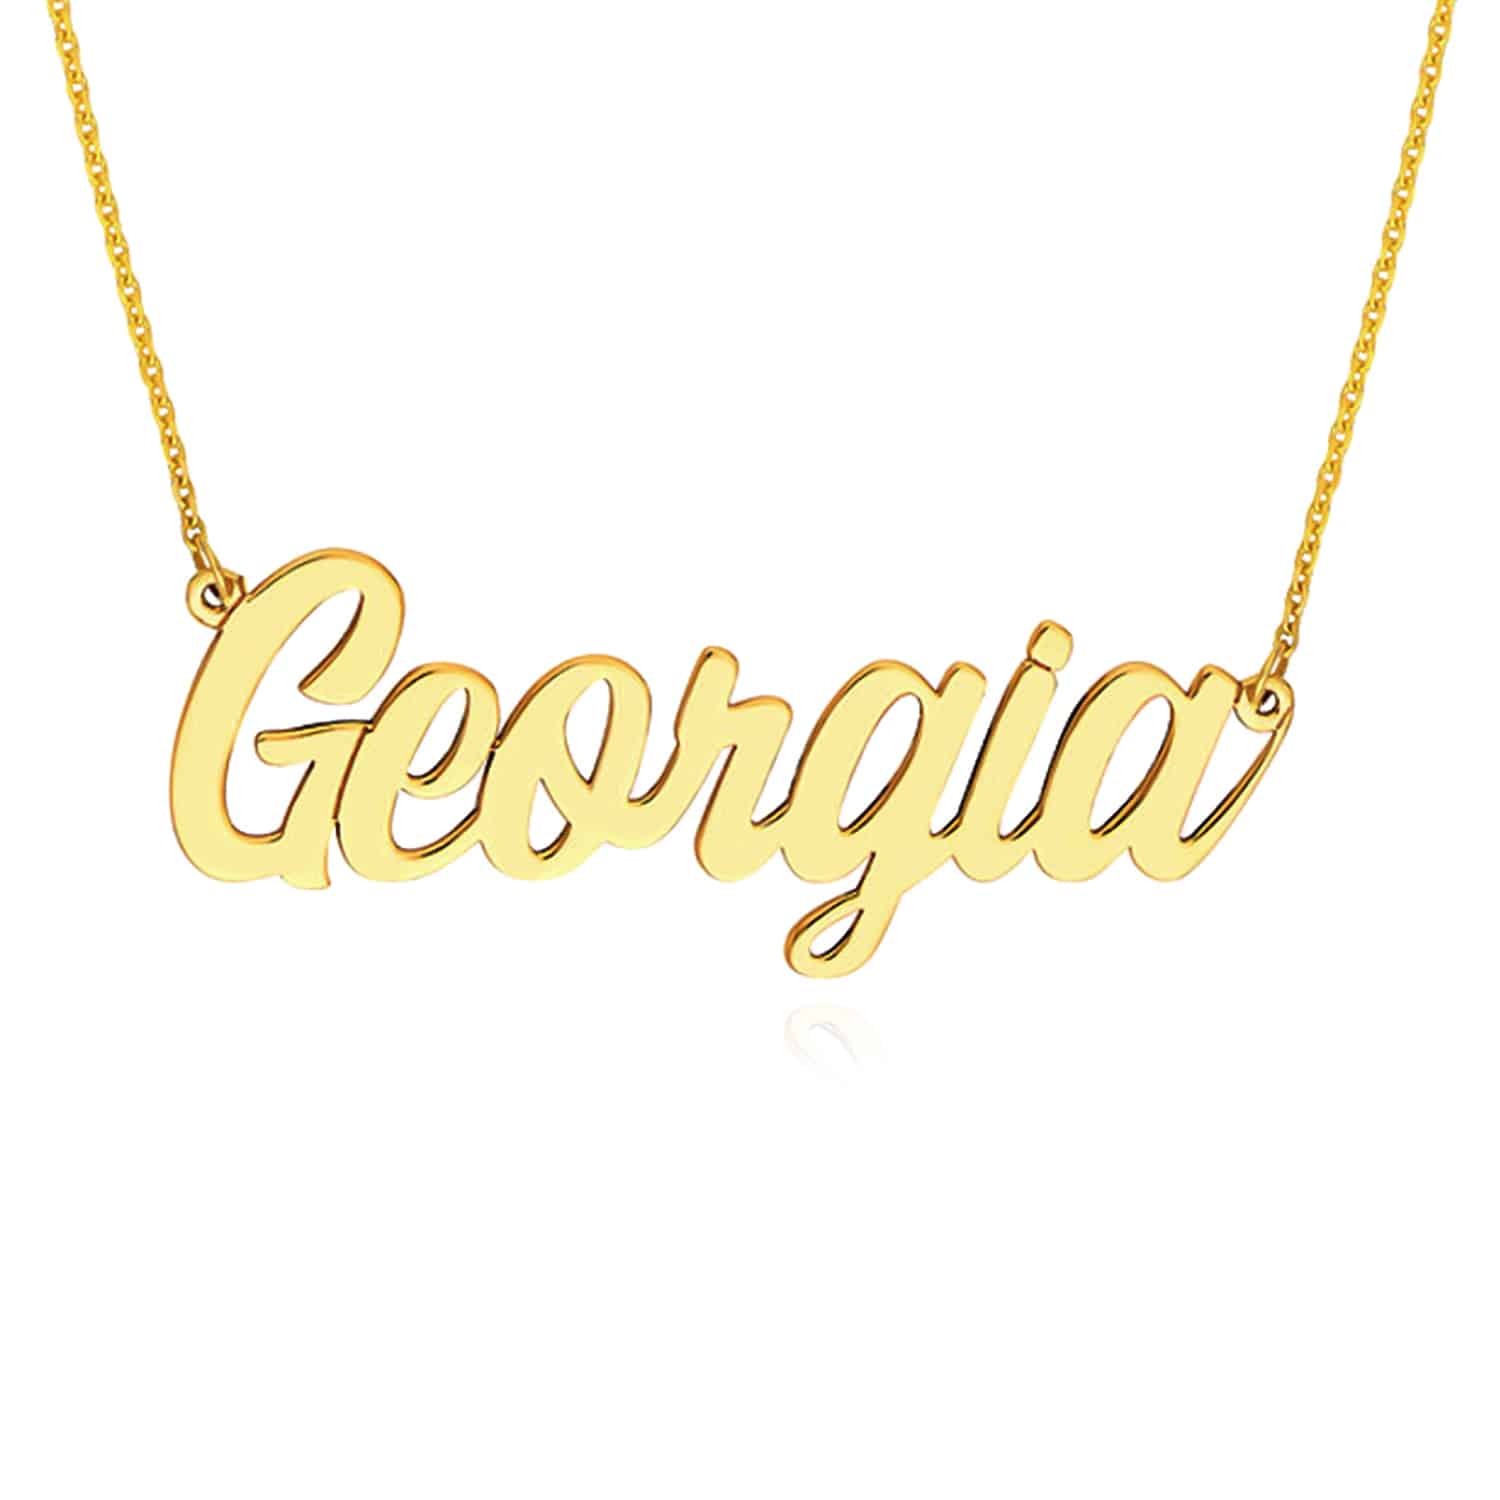 Customizable 14K Gold Yellow White Rose Script Nameplate Pendant Necklace 14-18" - Yellow Gold, 16"-18" Adjustable